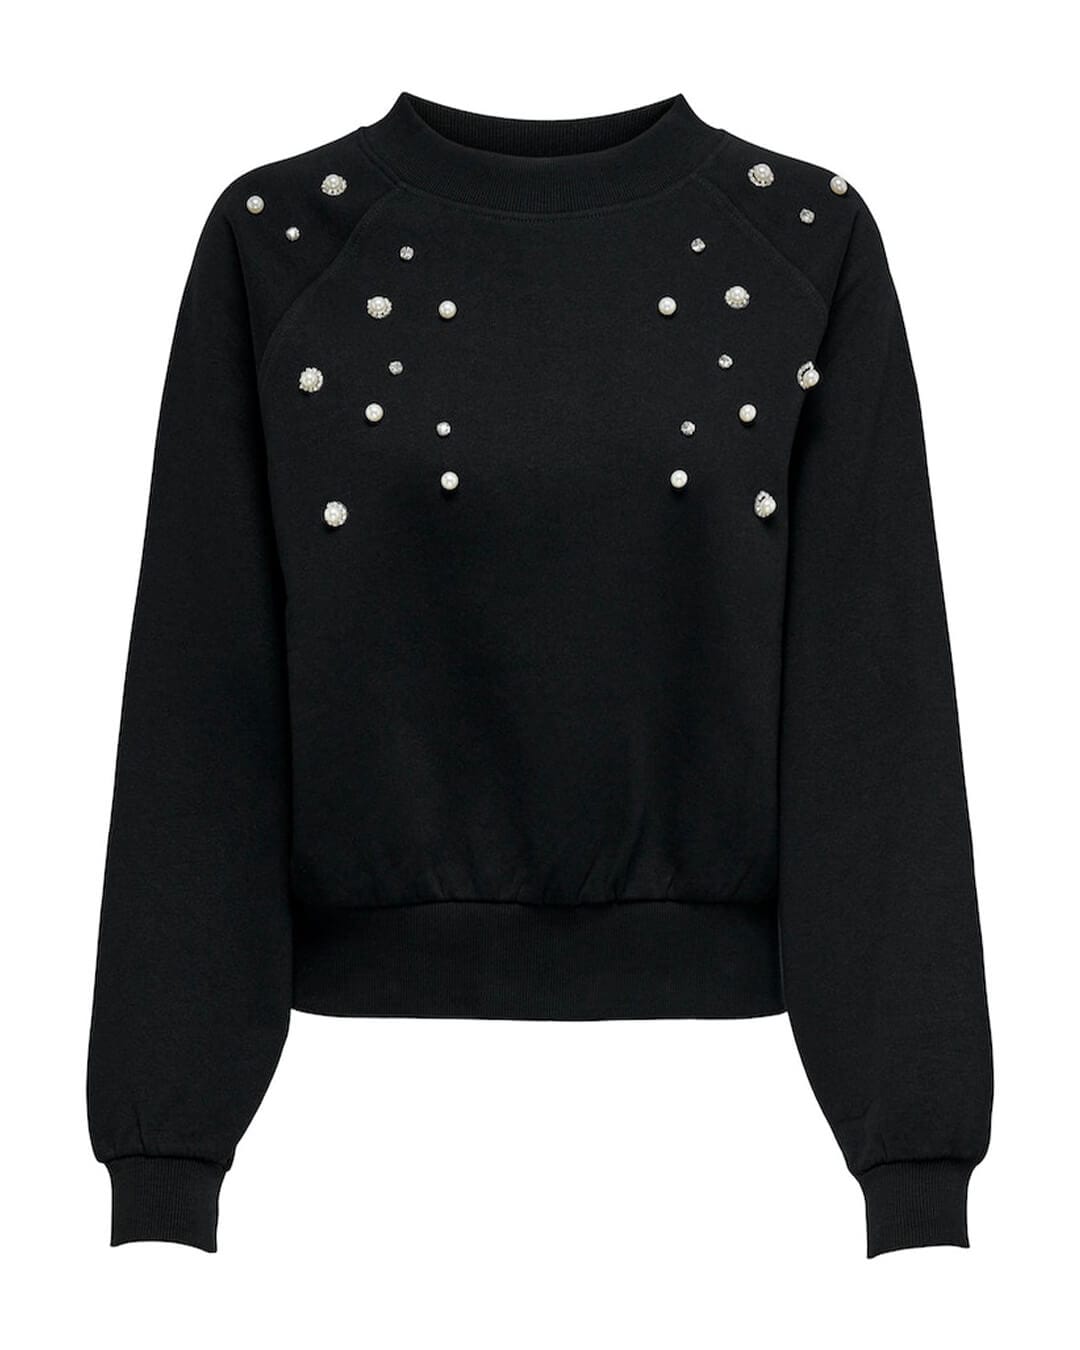 Only Jumpers Only Cama Black Shine Crew Neck Sweatshirt